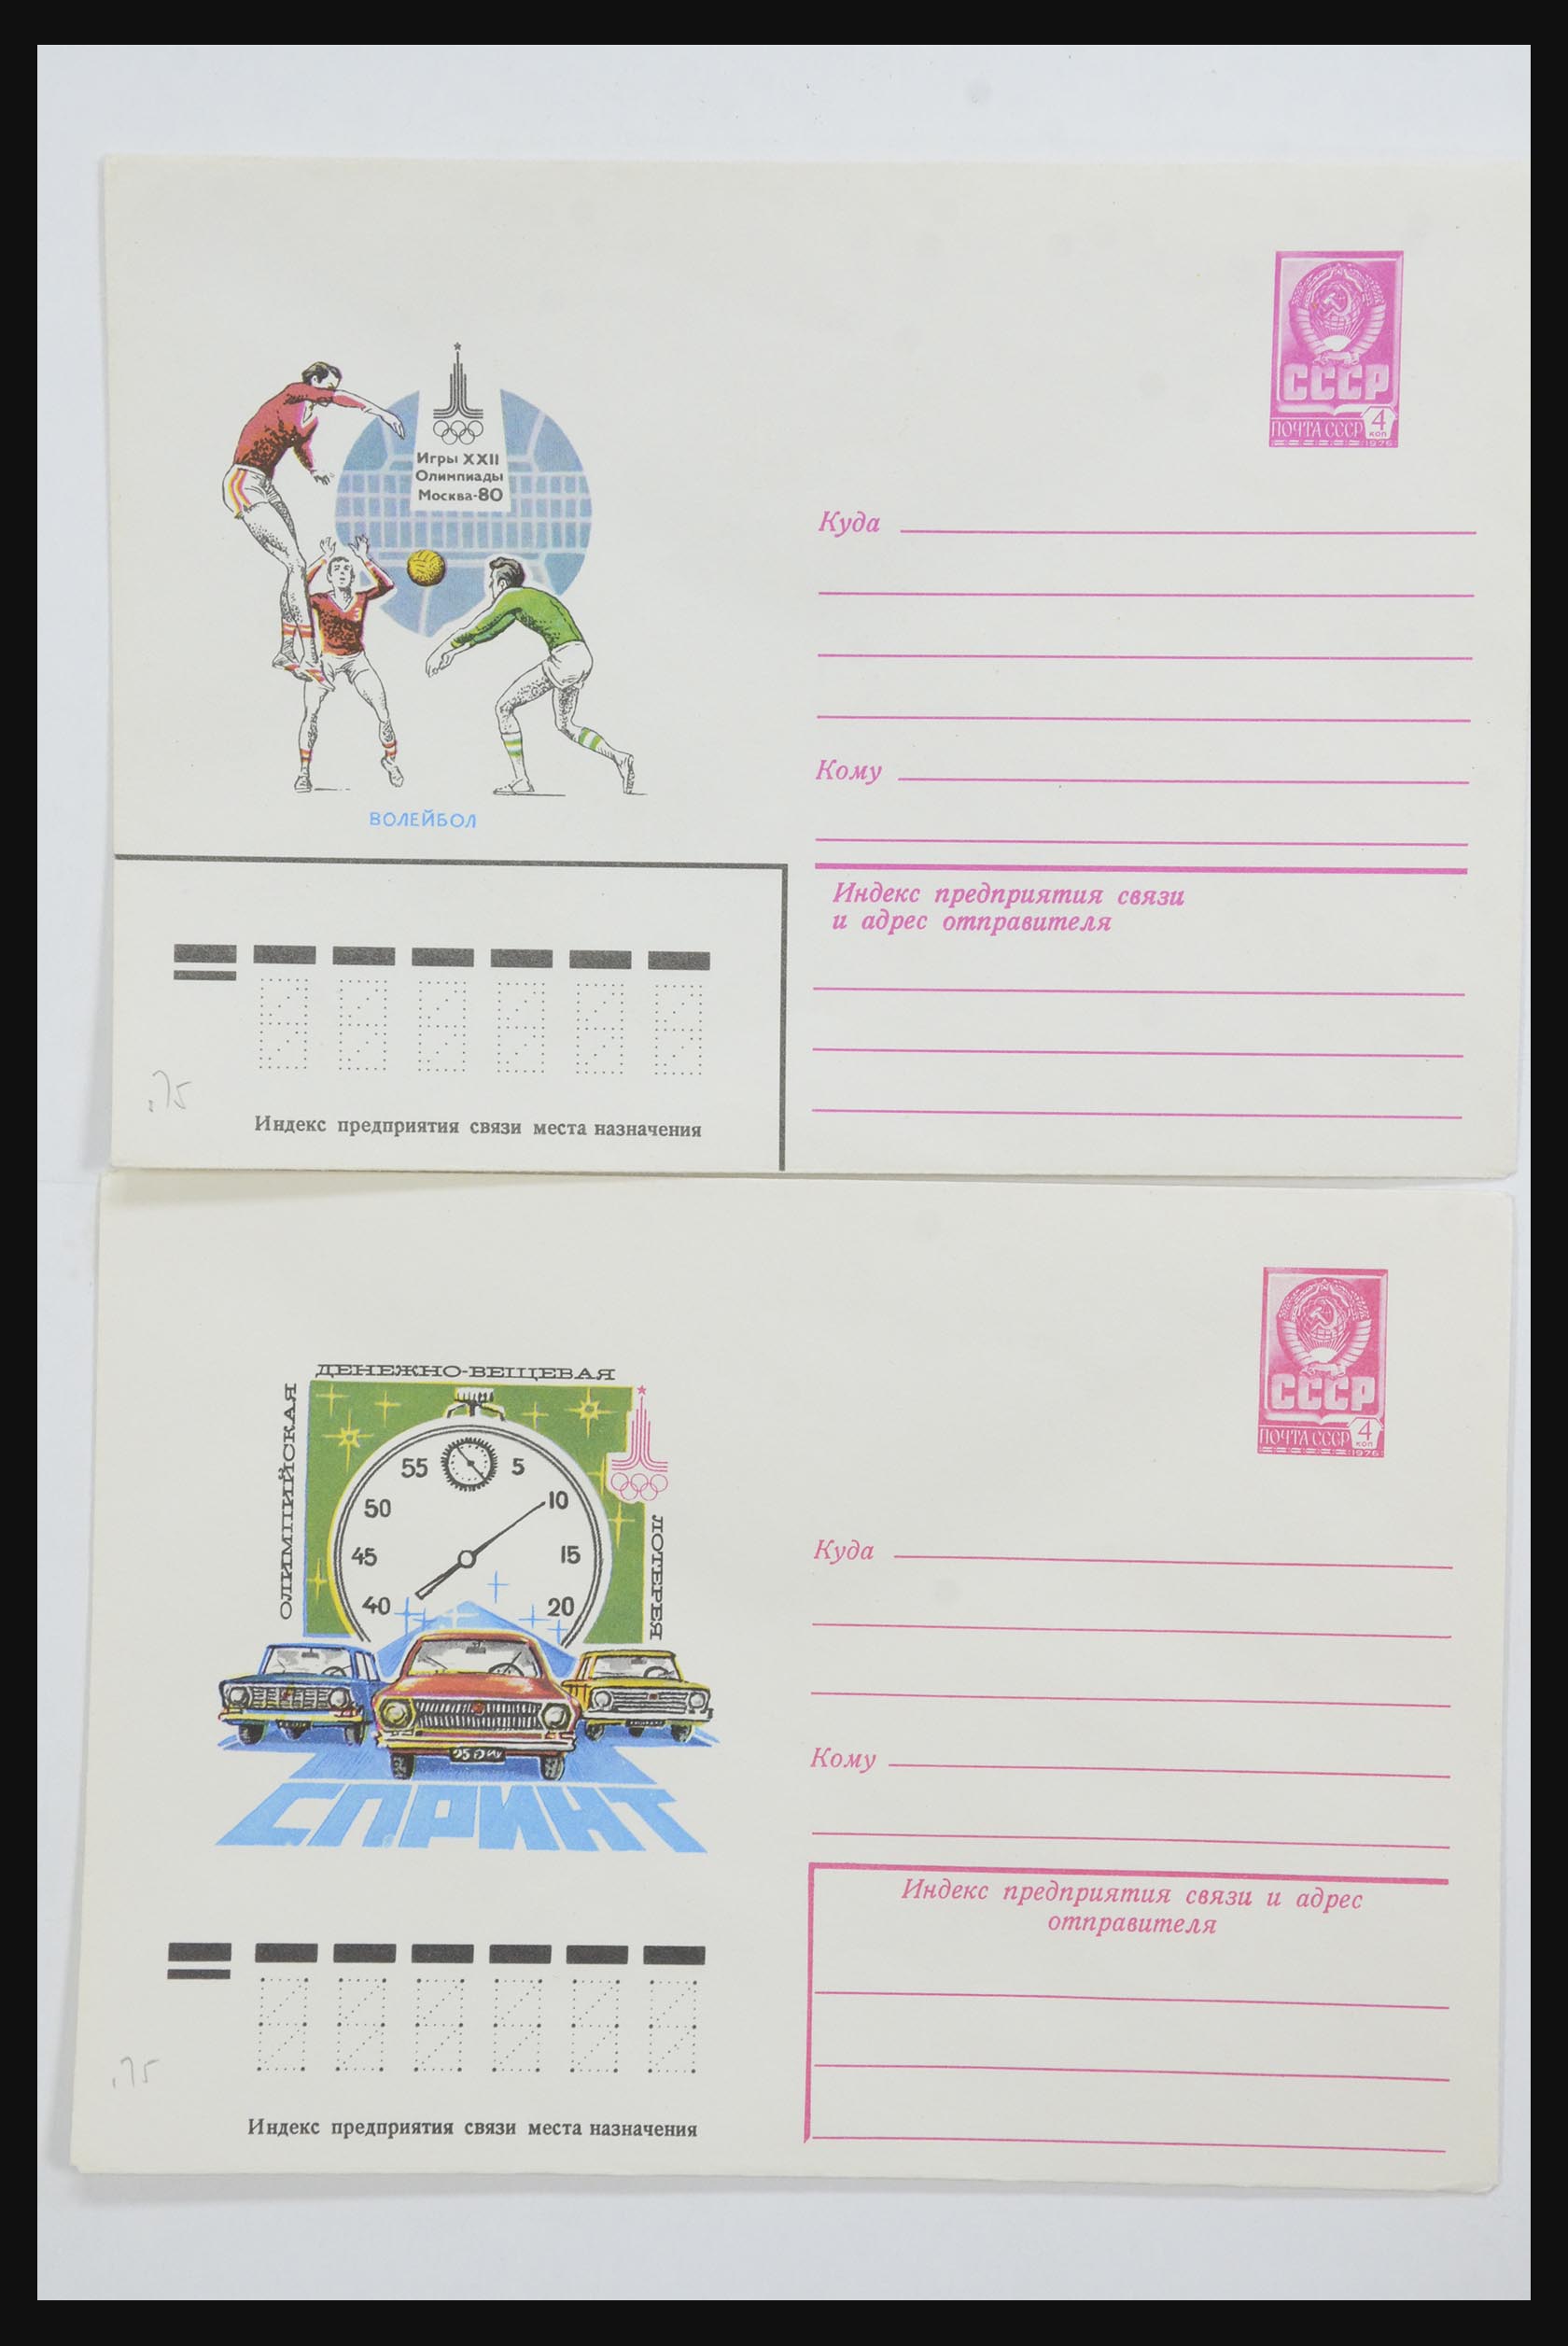 31928 0071 - 31928 Eastern Europe covers 1960's-1990's.